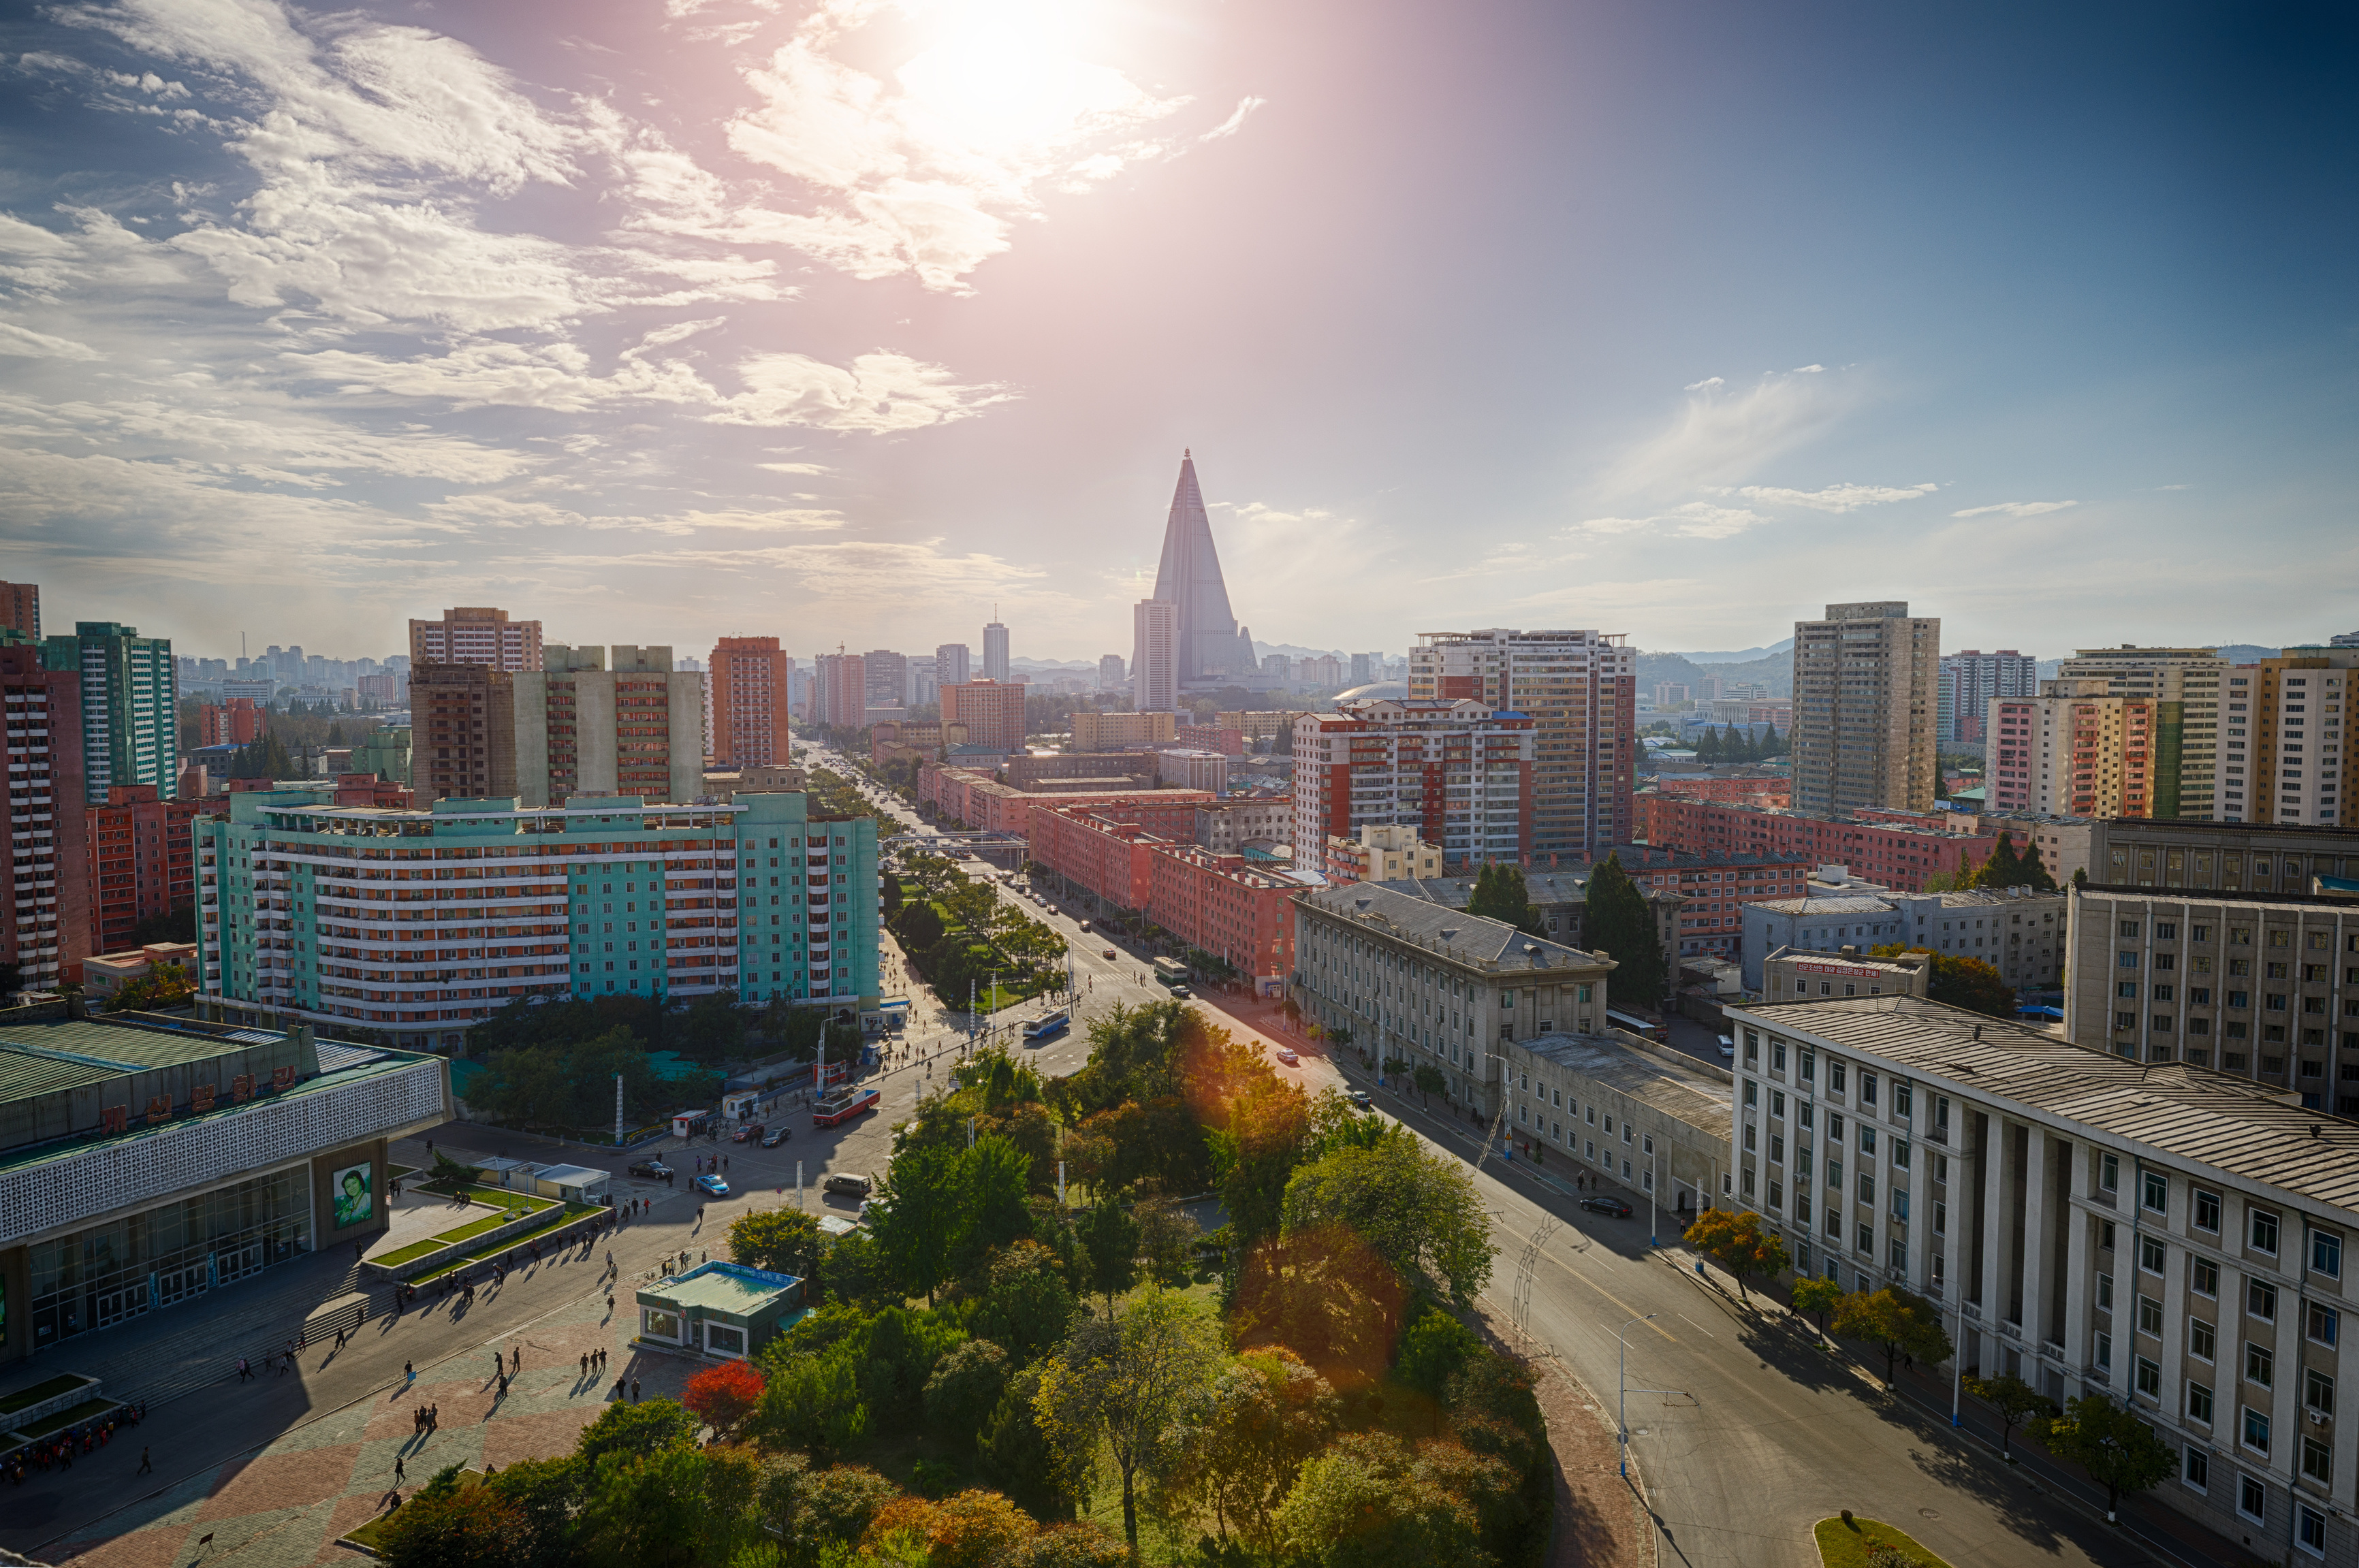 North Korea, December 2019: Business as Usual, but Pyongyang is Worse Off